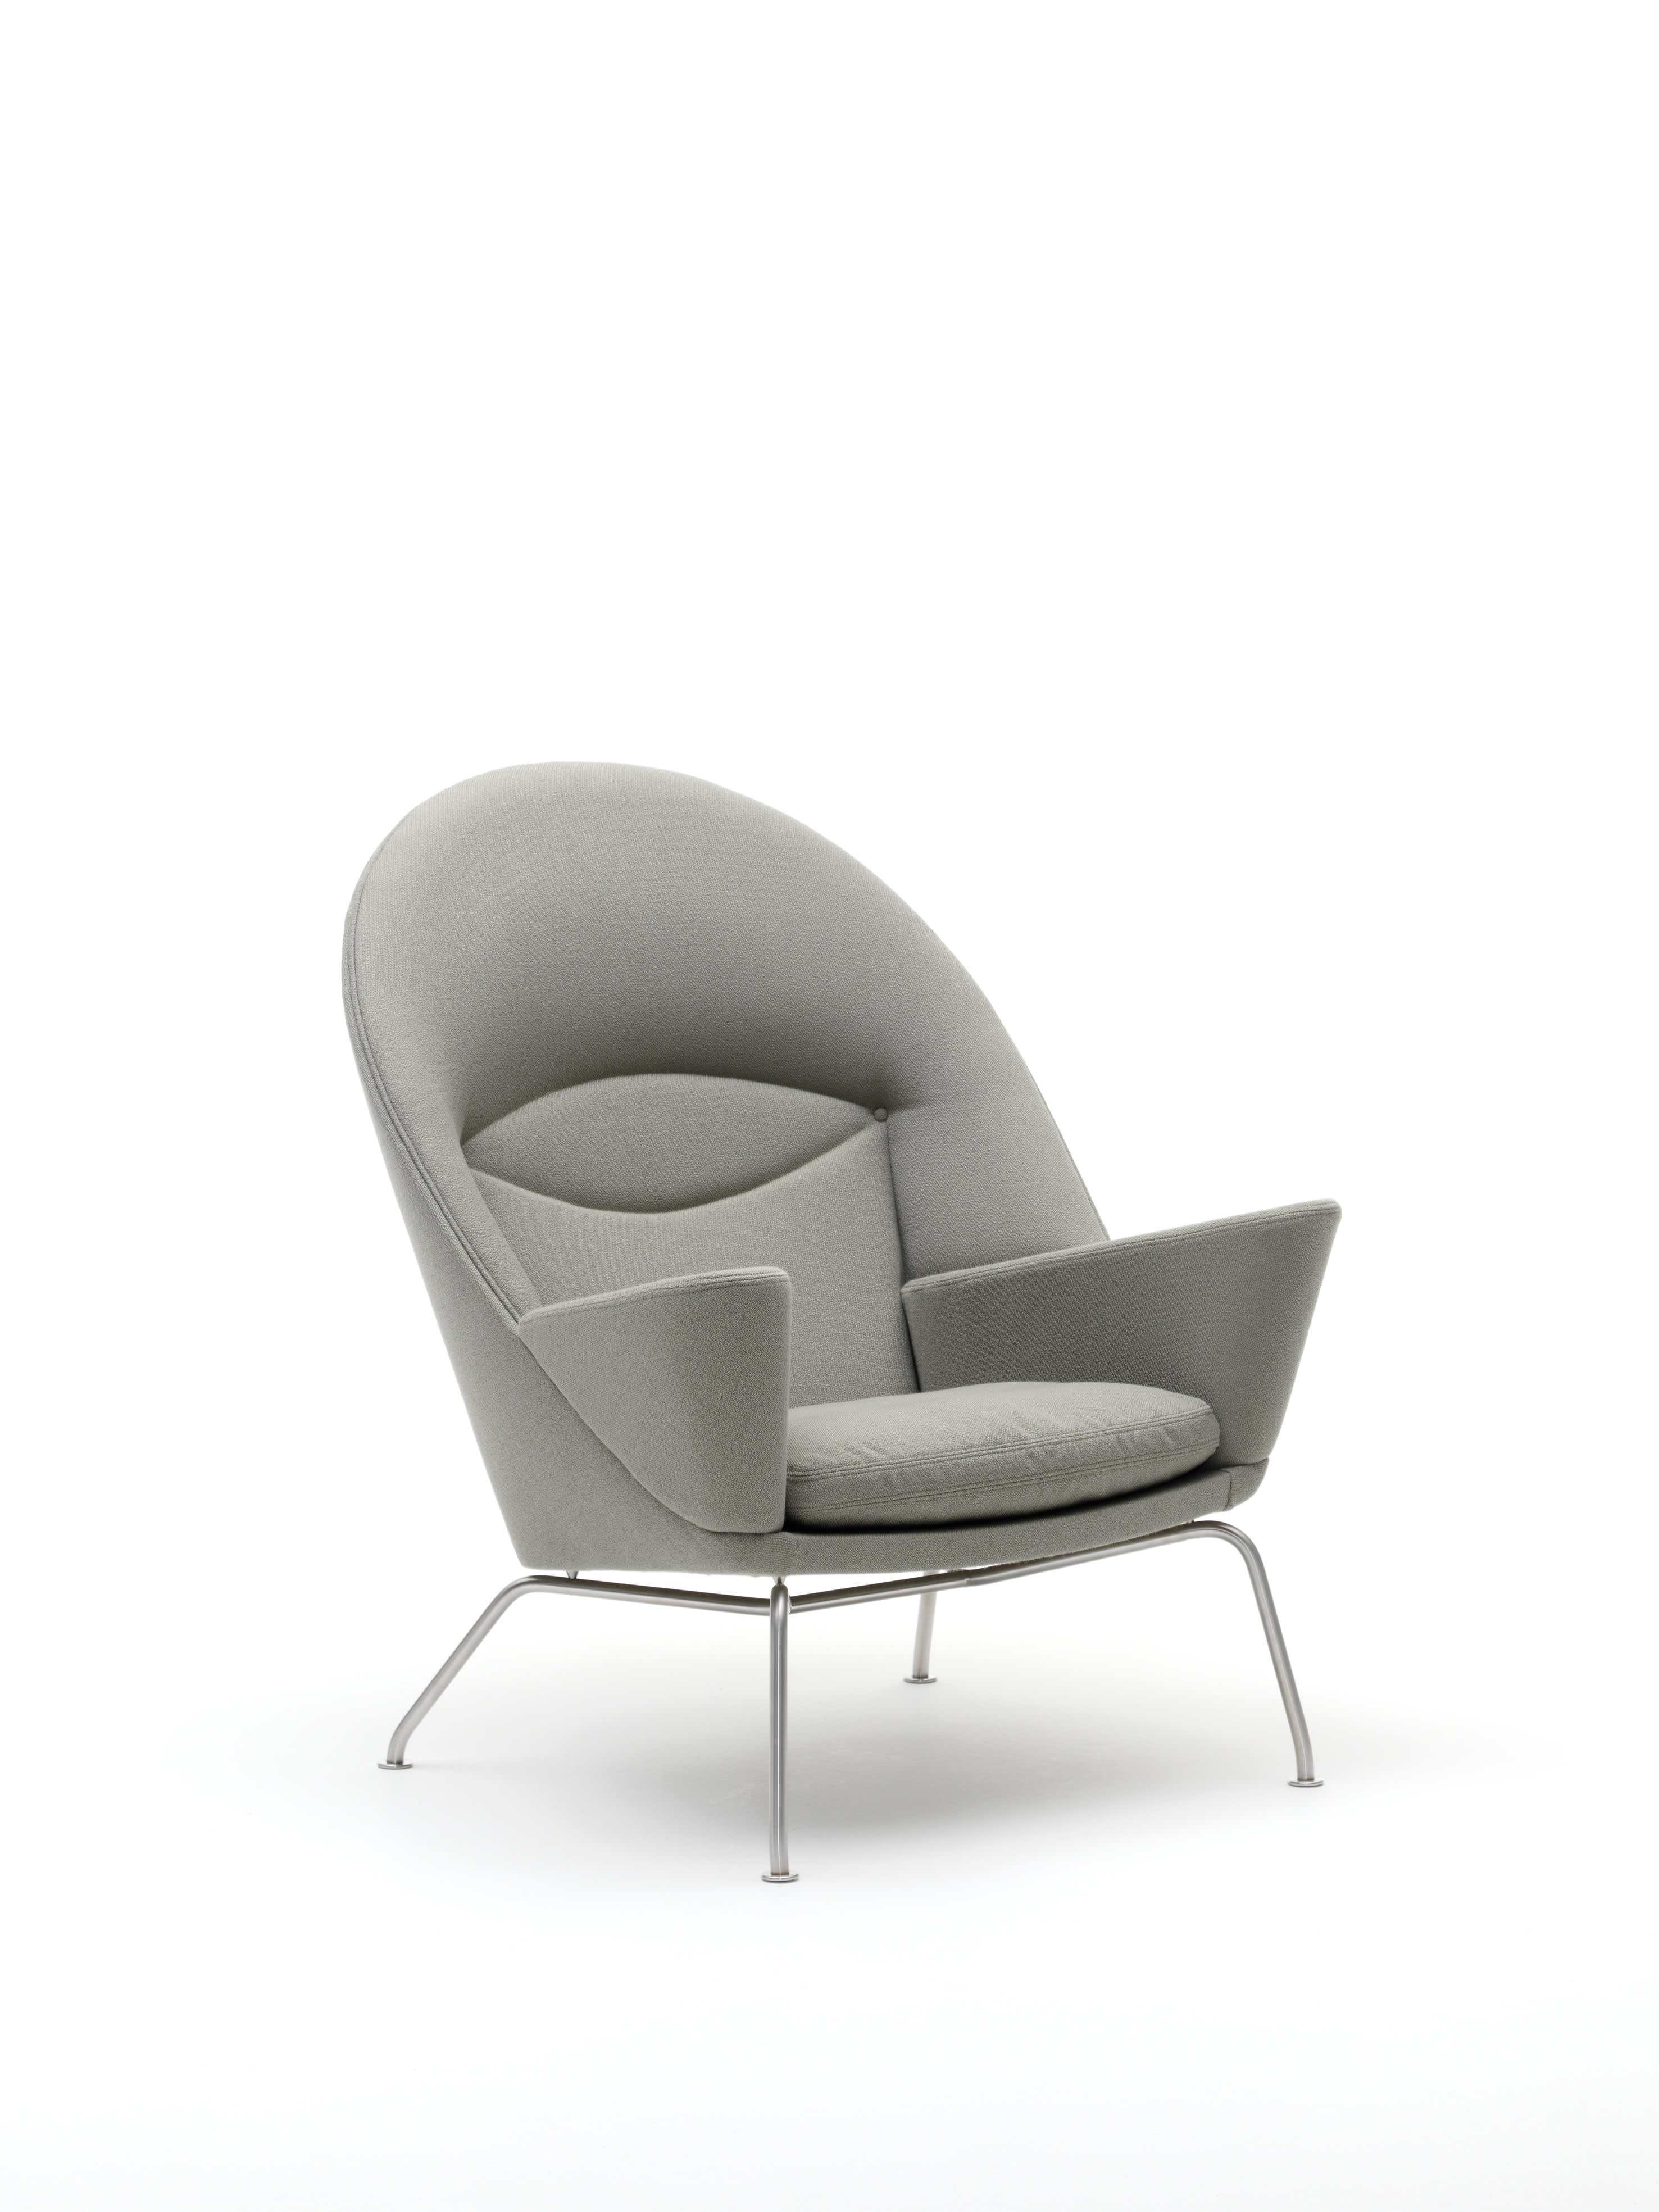 Oculus Chair CH468 by Carl Son | Steelcase Store